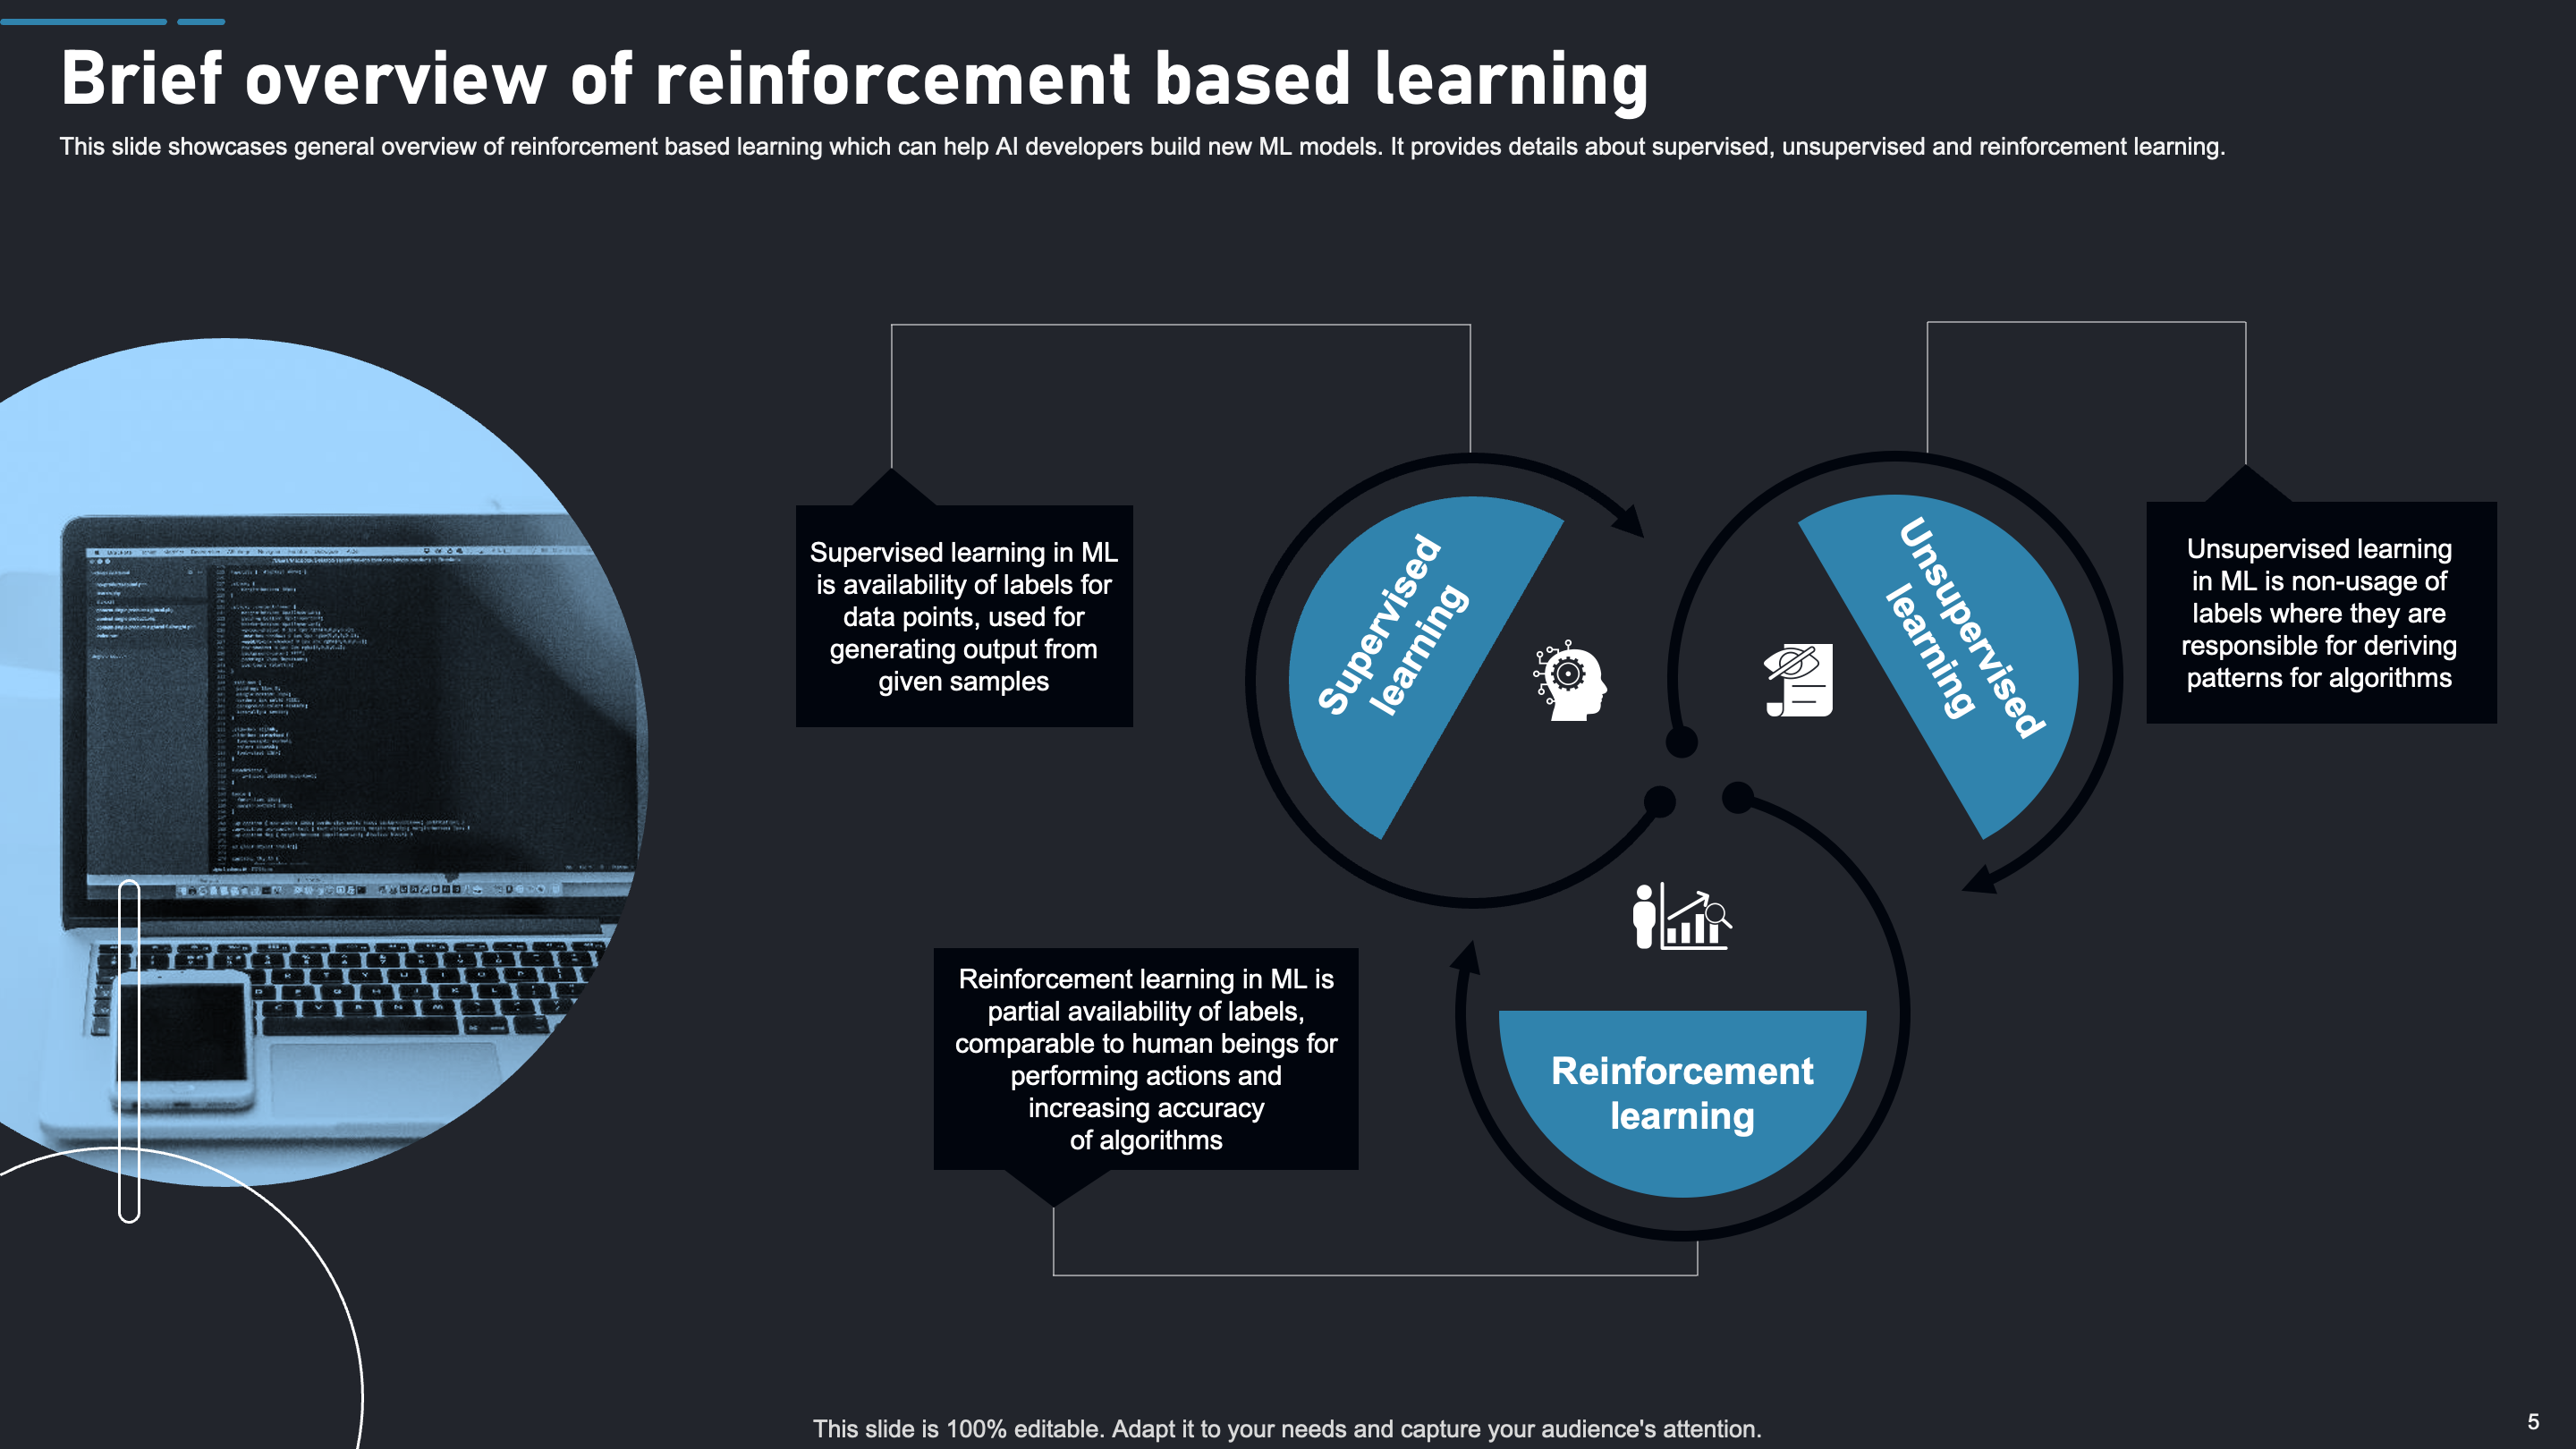 Brief Overview of Reinforcement Based Learning